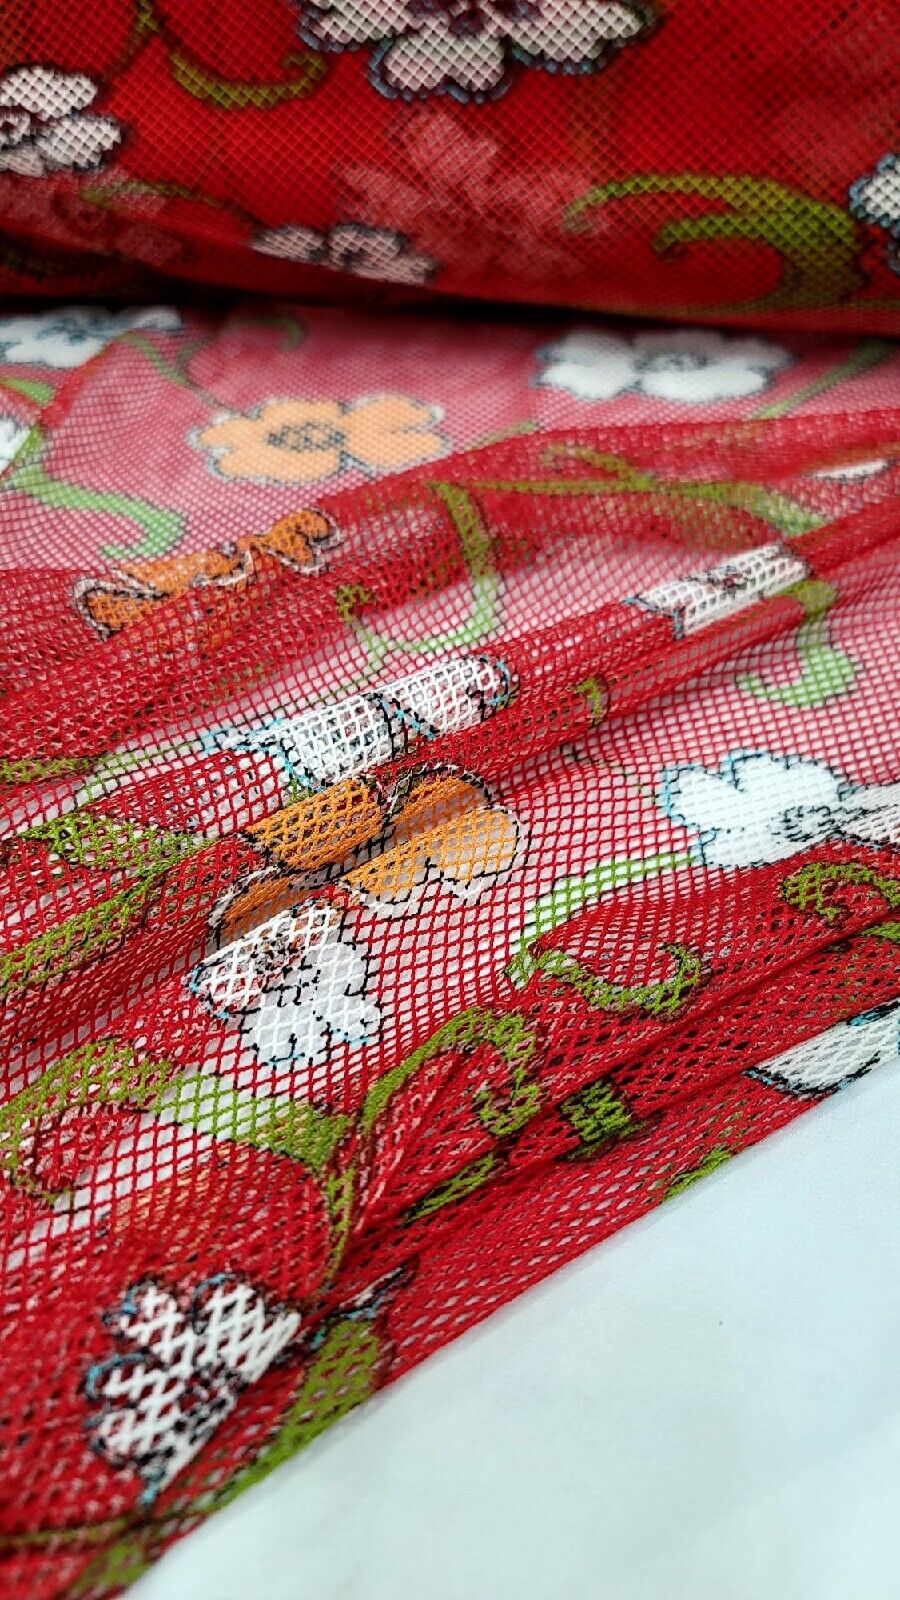 Fish Net Red Floral Flowers Fabric - Sold By The Yard - Fashion Fabric (54” Width)